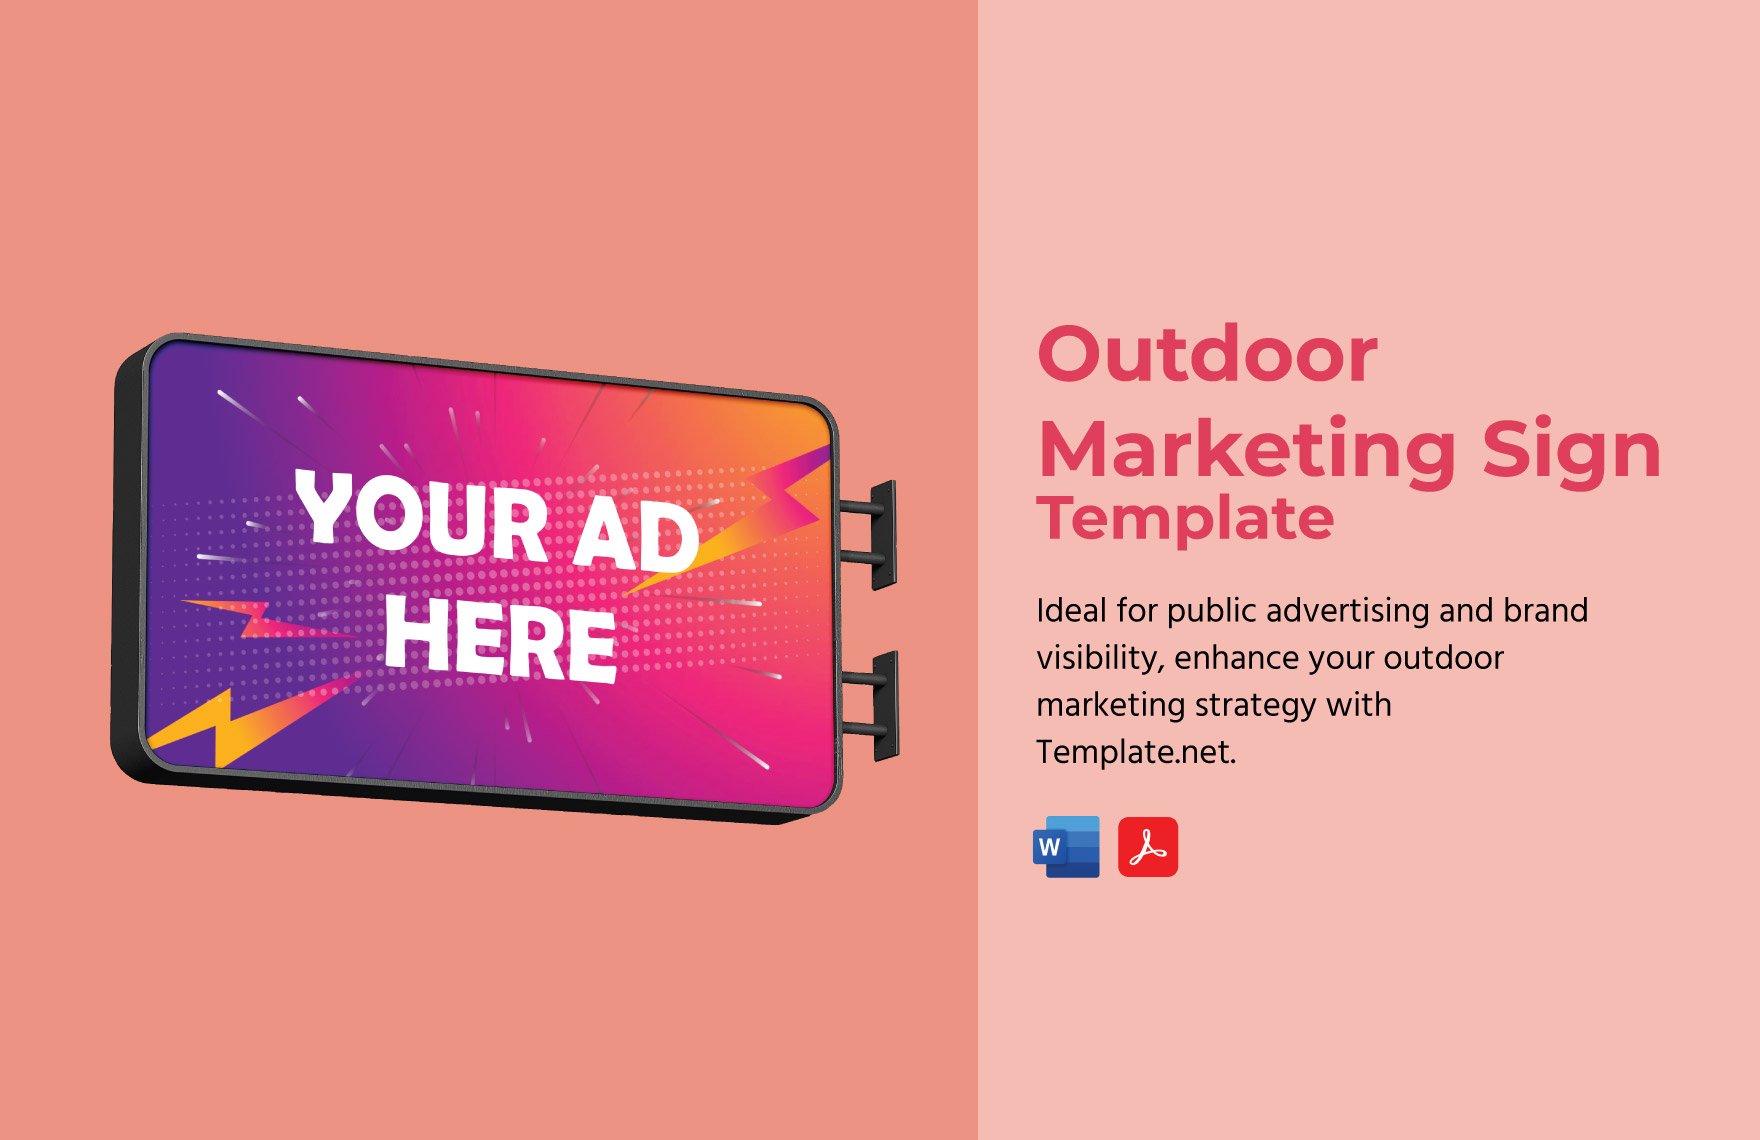 Outdoor Marketing Sign Template